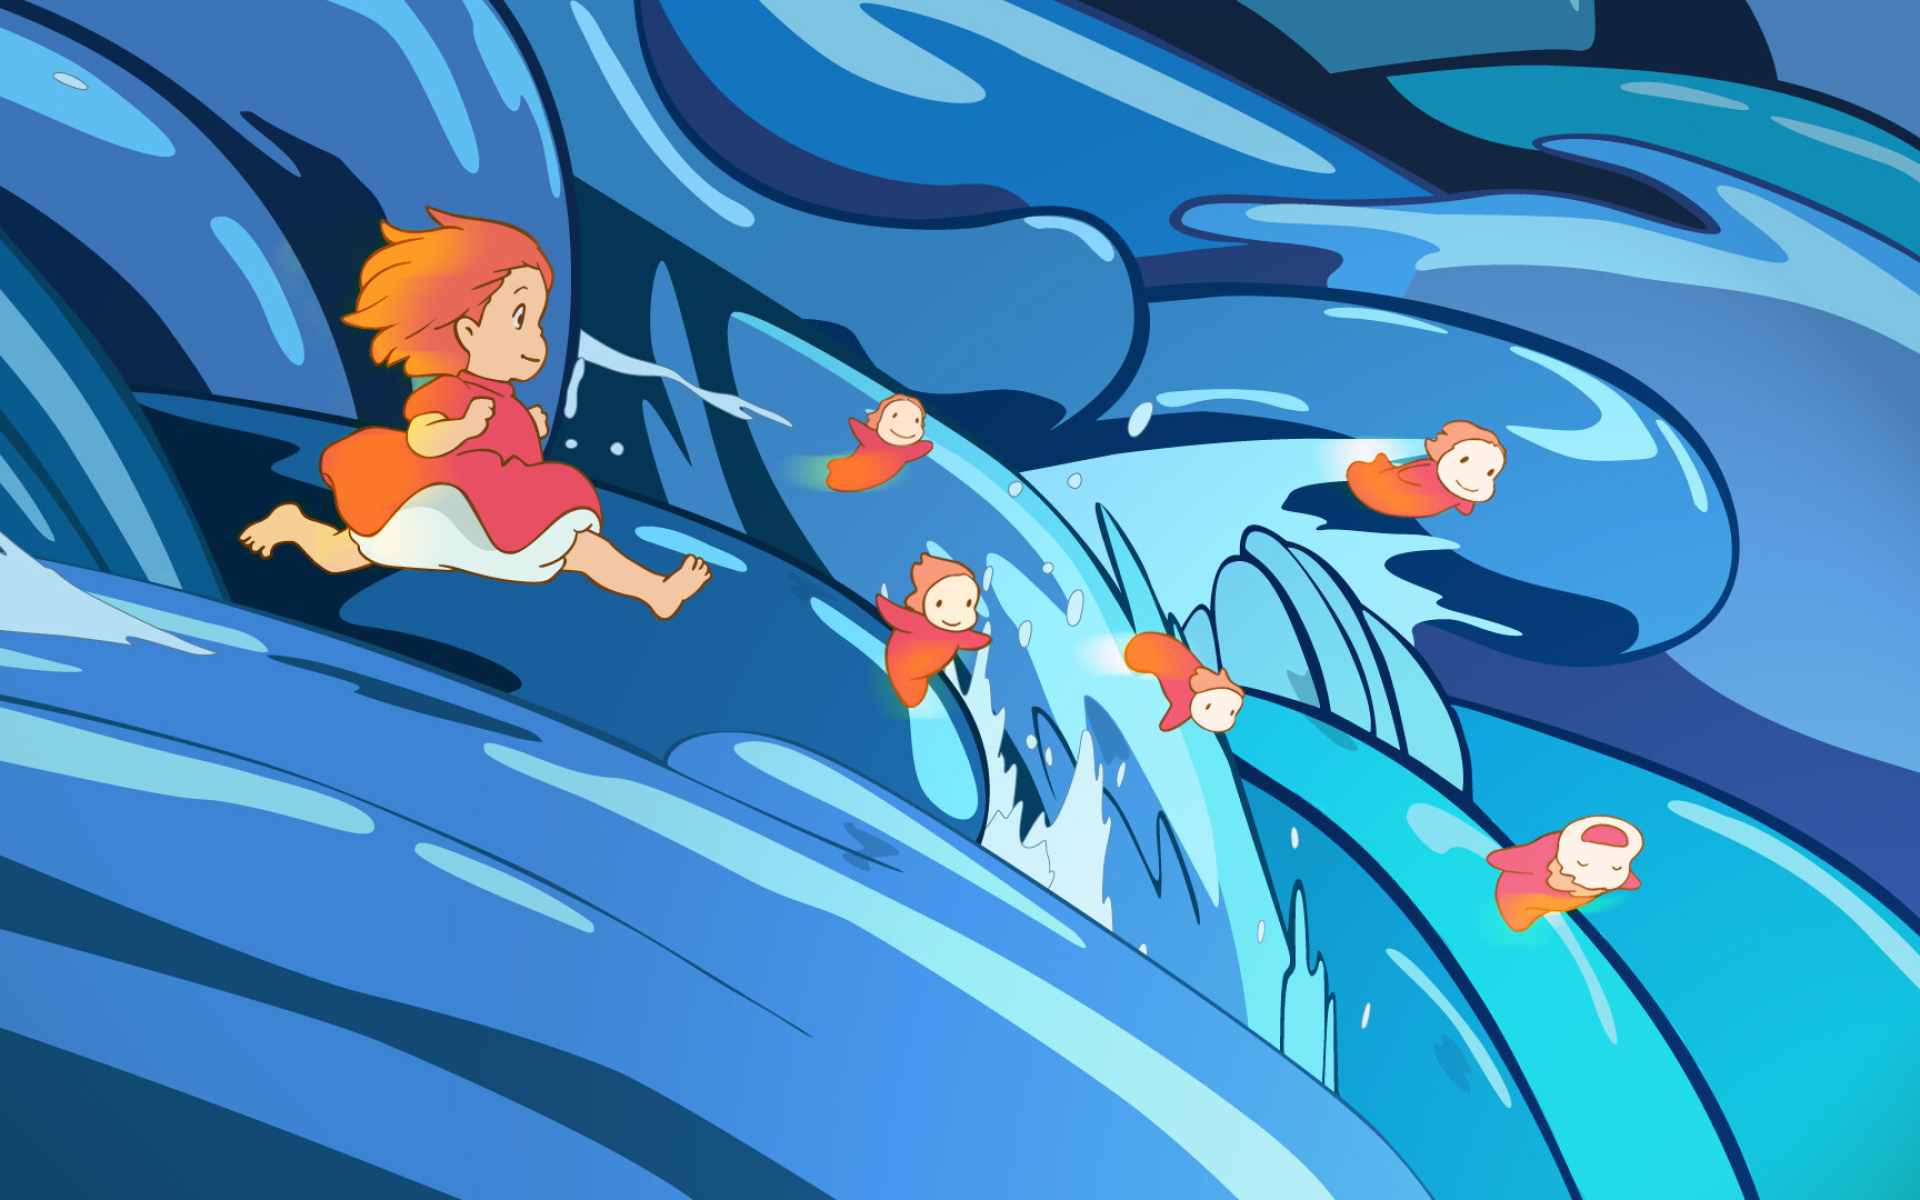 Ponyo: A magic fish who has decided that she wants to live with Sosuke and the other humans. 1920x1200 HD Wallpaper.